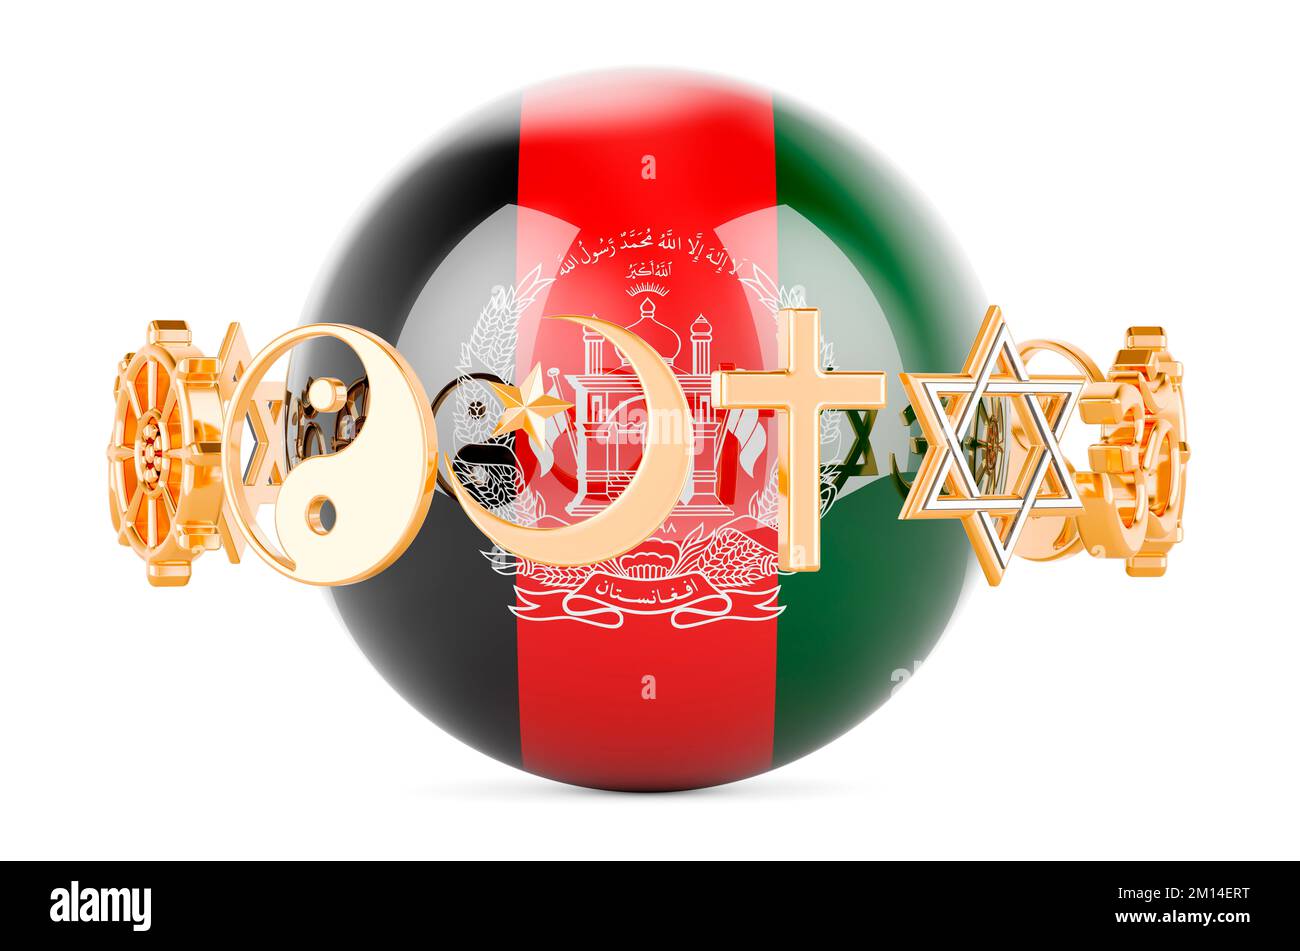 Afghan flag painted on sphere with religions symbols around, 3D rendering isolated on white background Stock Photo